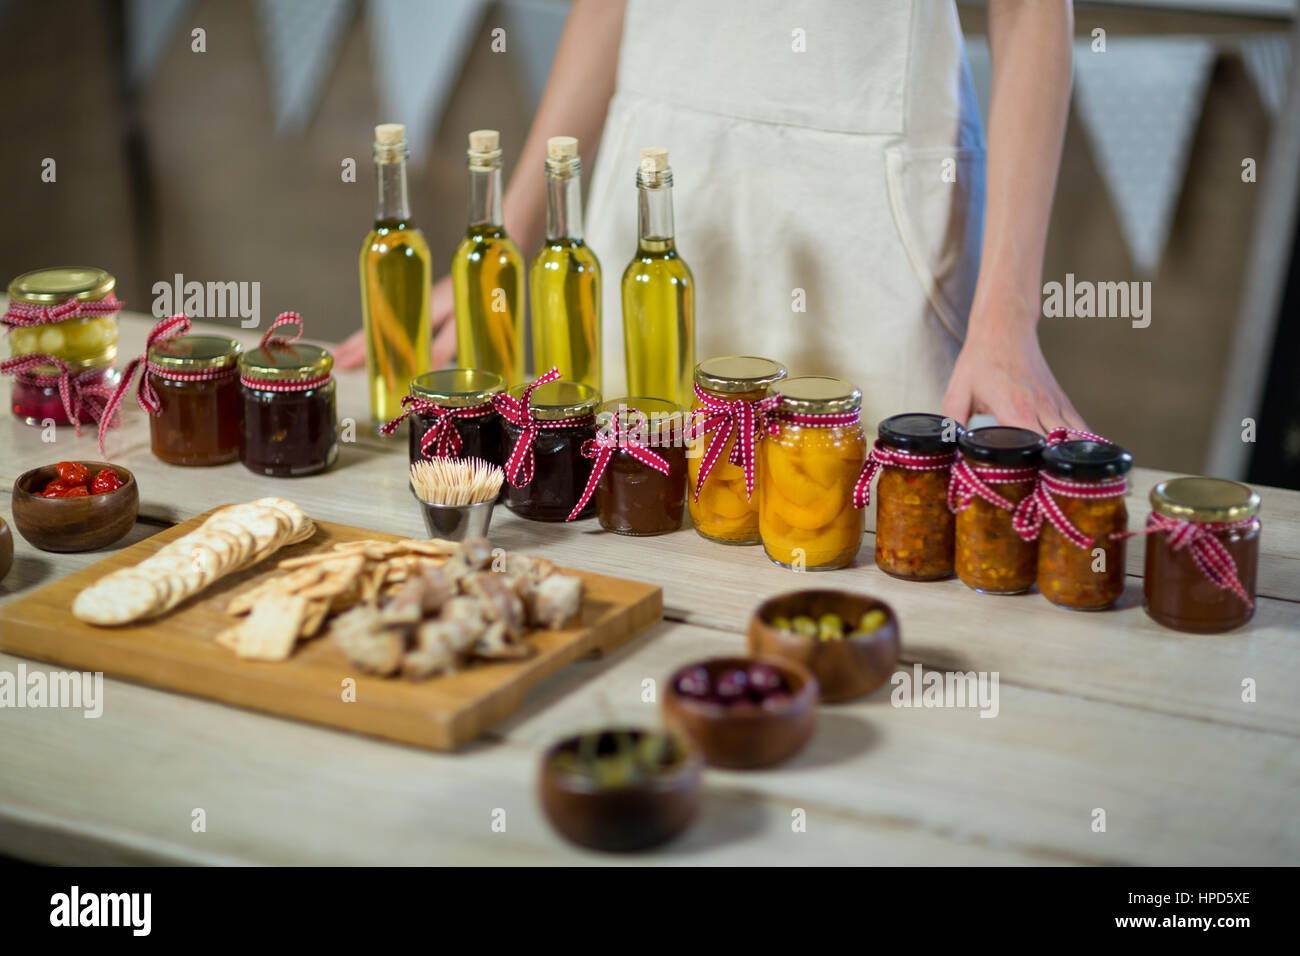 The pickle guys hi-res stock photography and images - Alamy